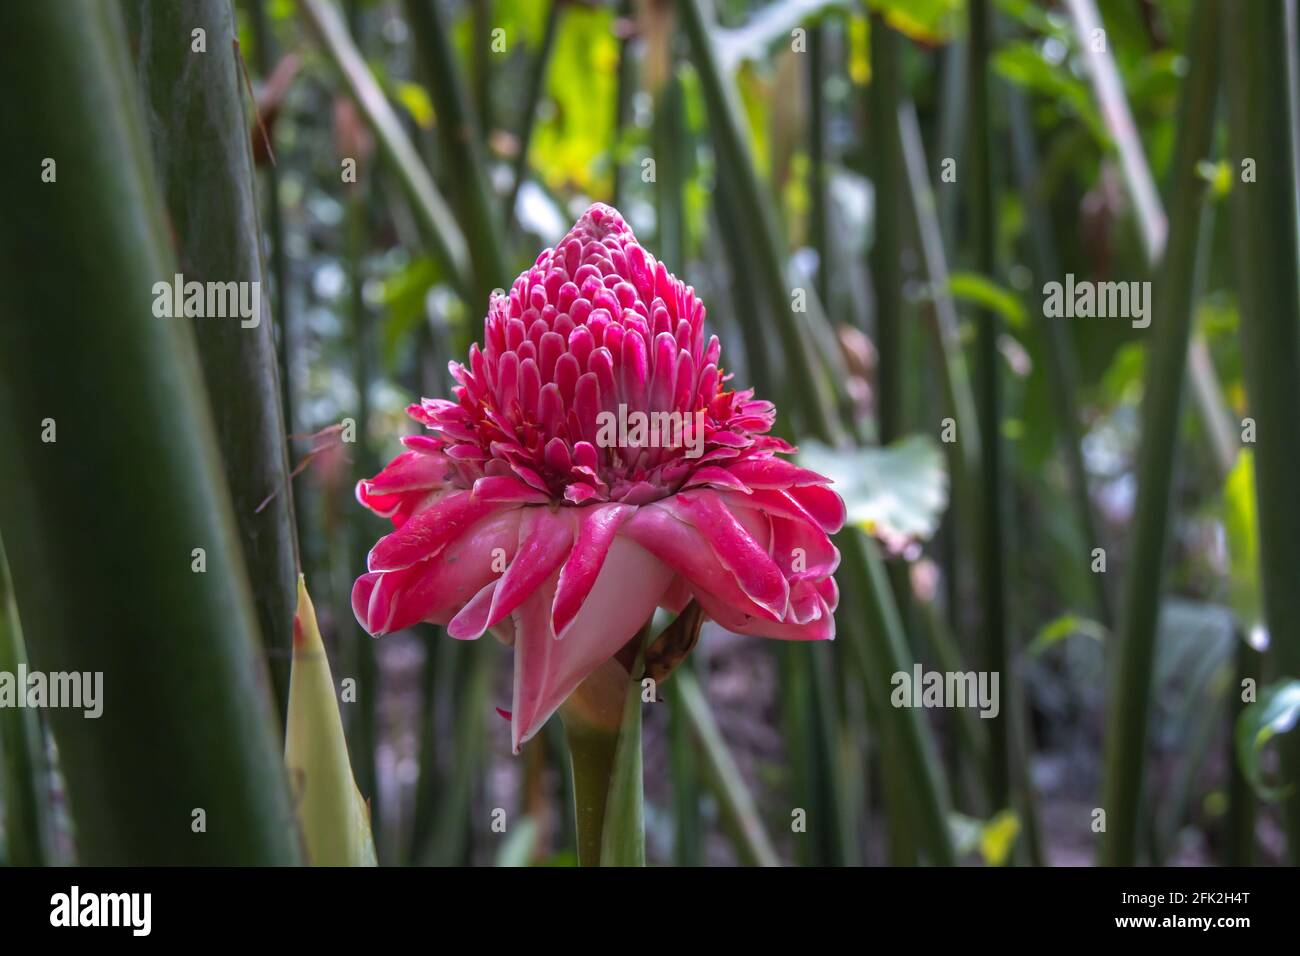 A single healthy torch ginger, or red ginger lily flower isolated among green leaves and branches in Barbados' Flower Forest. Pink, vibrant, healthy. Stock Photo